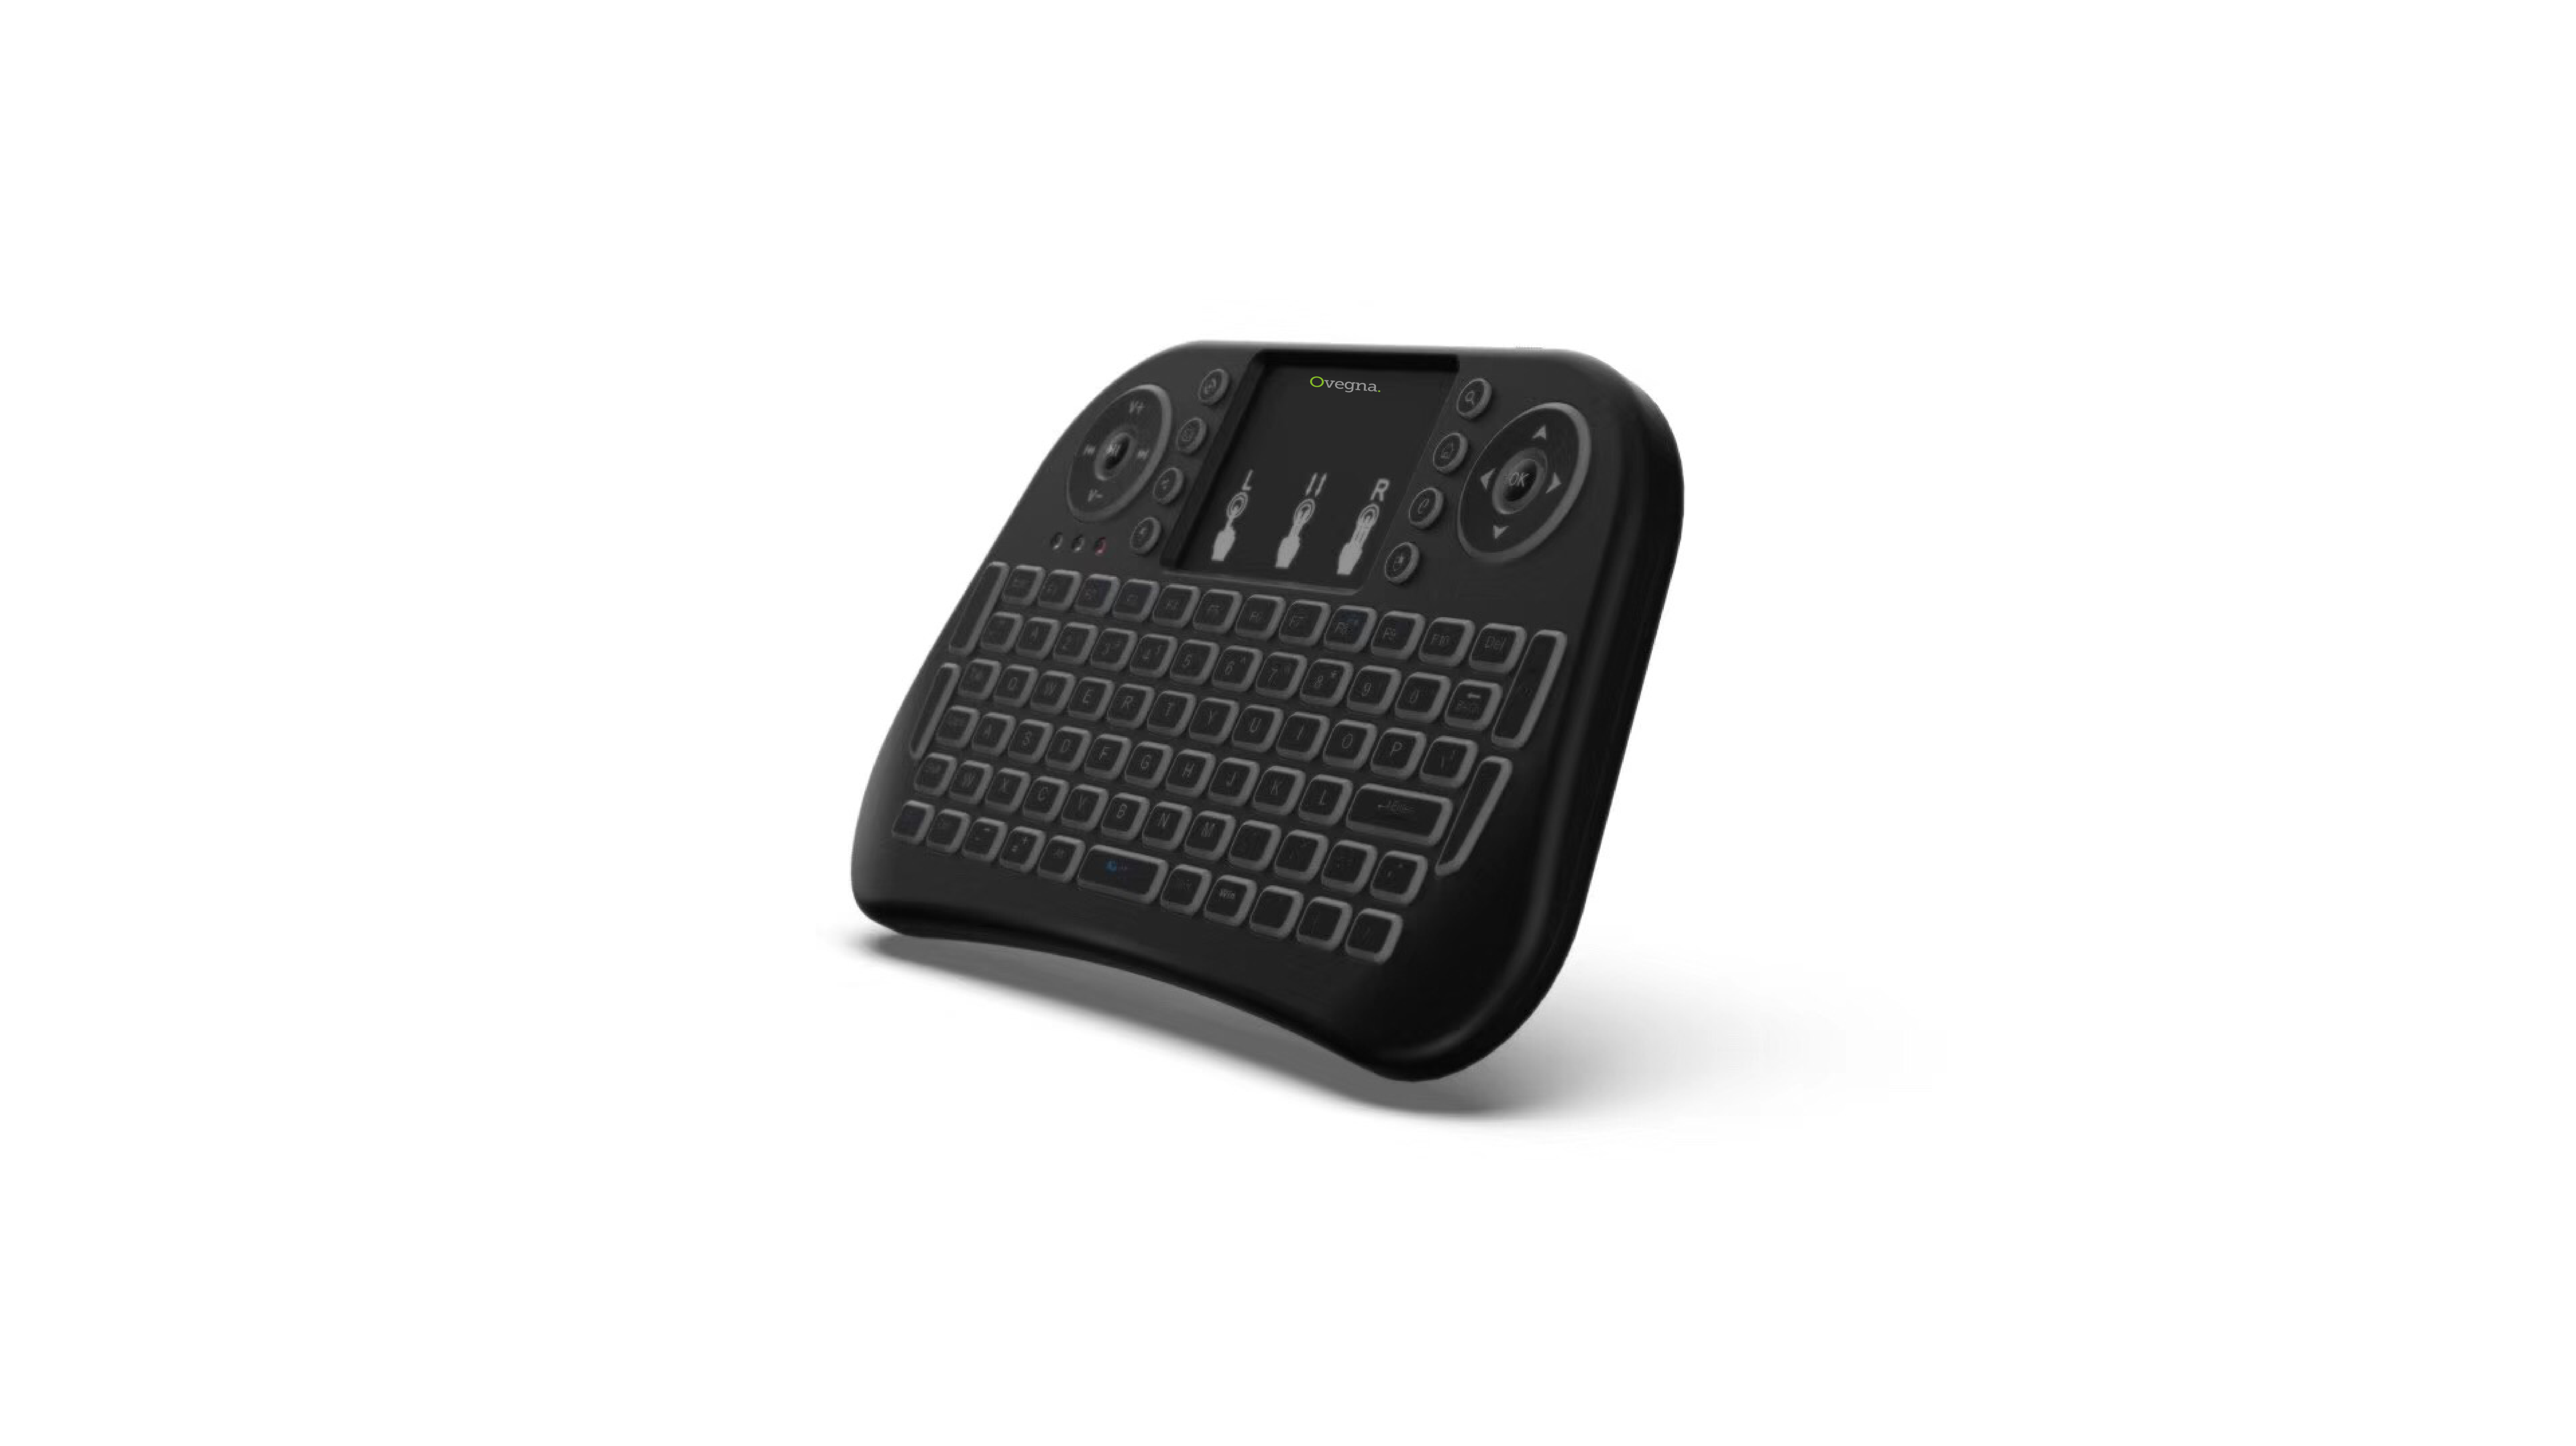 Ovegna i10: AZERTY Wireless Mini Keyboard, Wireless 2.4Ghz, Touchpad, Rechargeable Battery, RGB Backlit, for Smart TV, PC, Mini PC, Mac, Raspberry PI 2/3/4, Consoles, Laptop and Android Box Hover